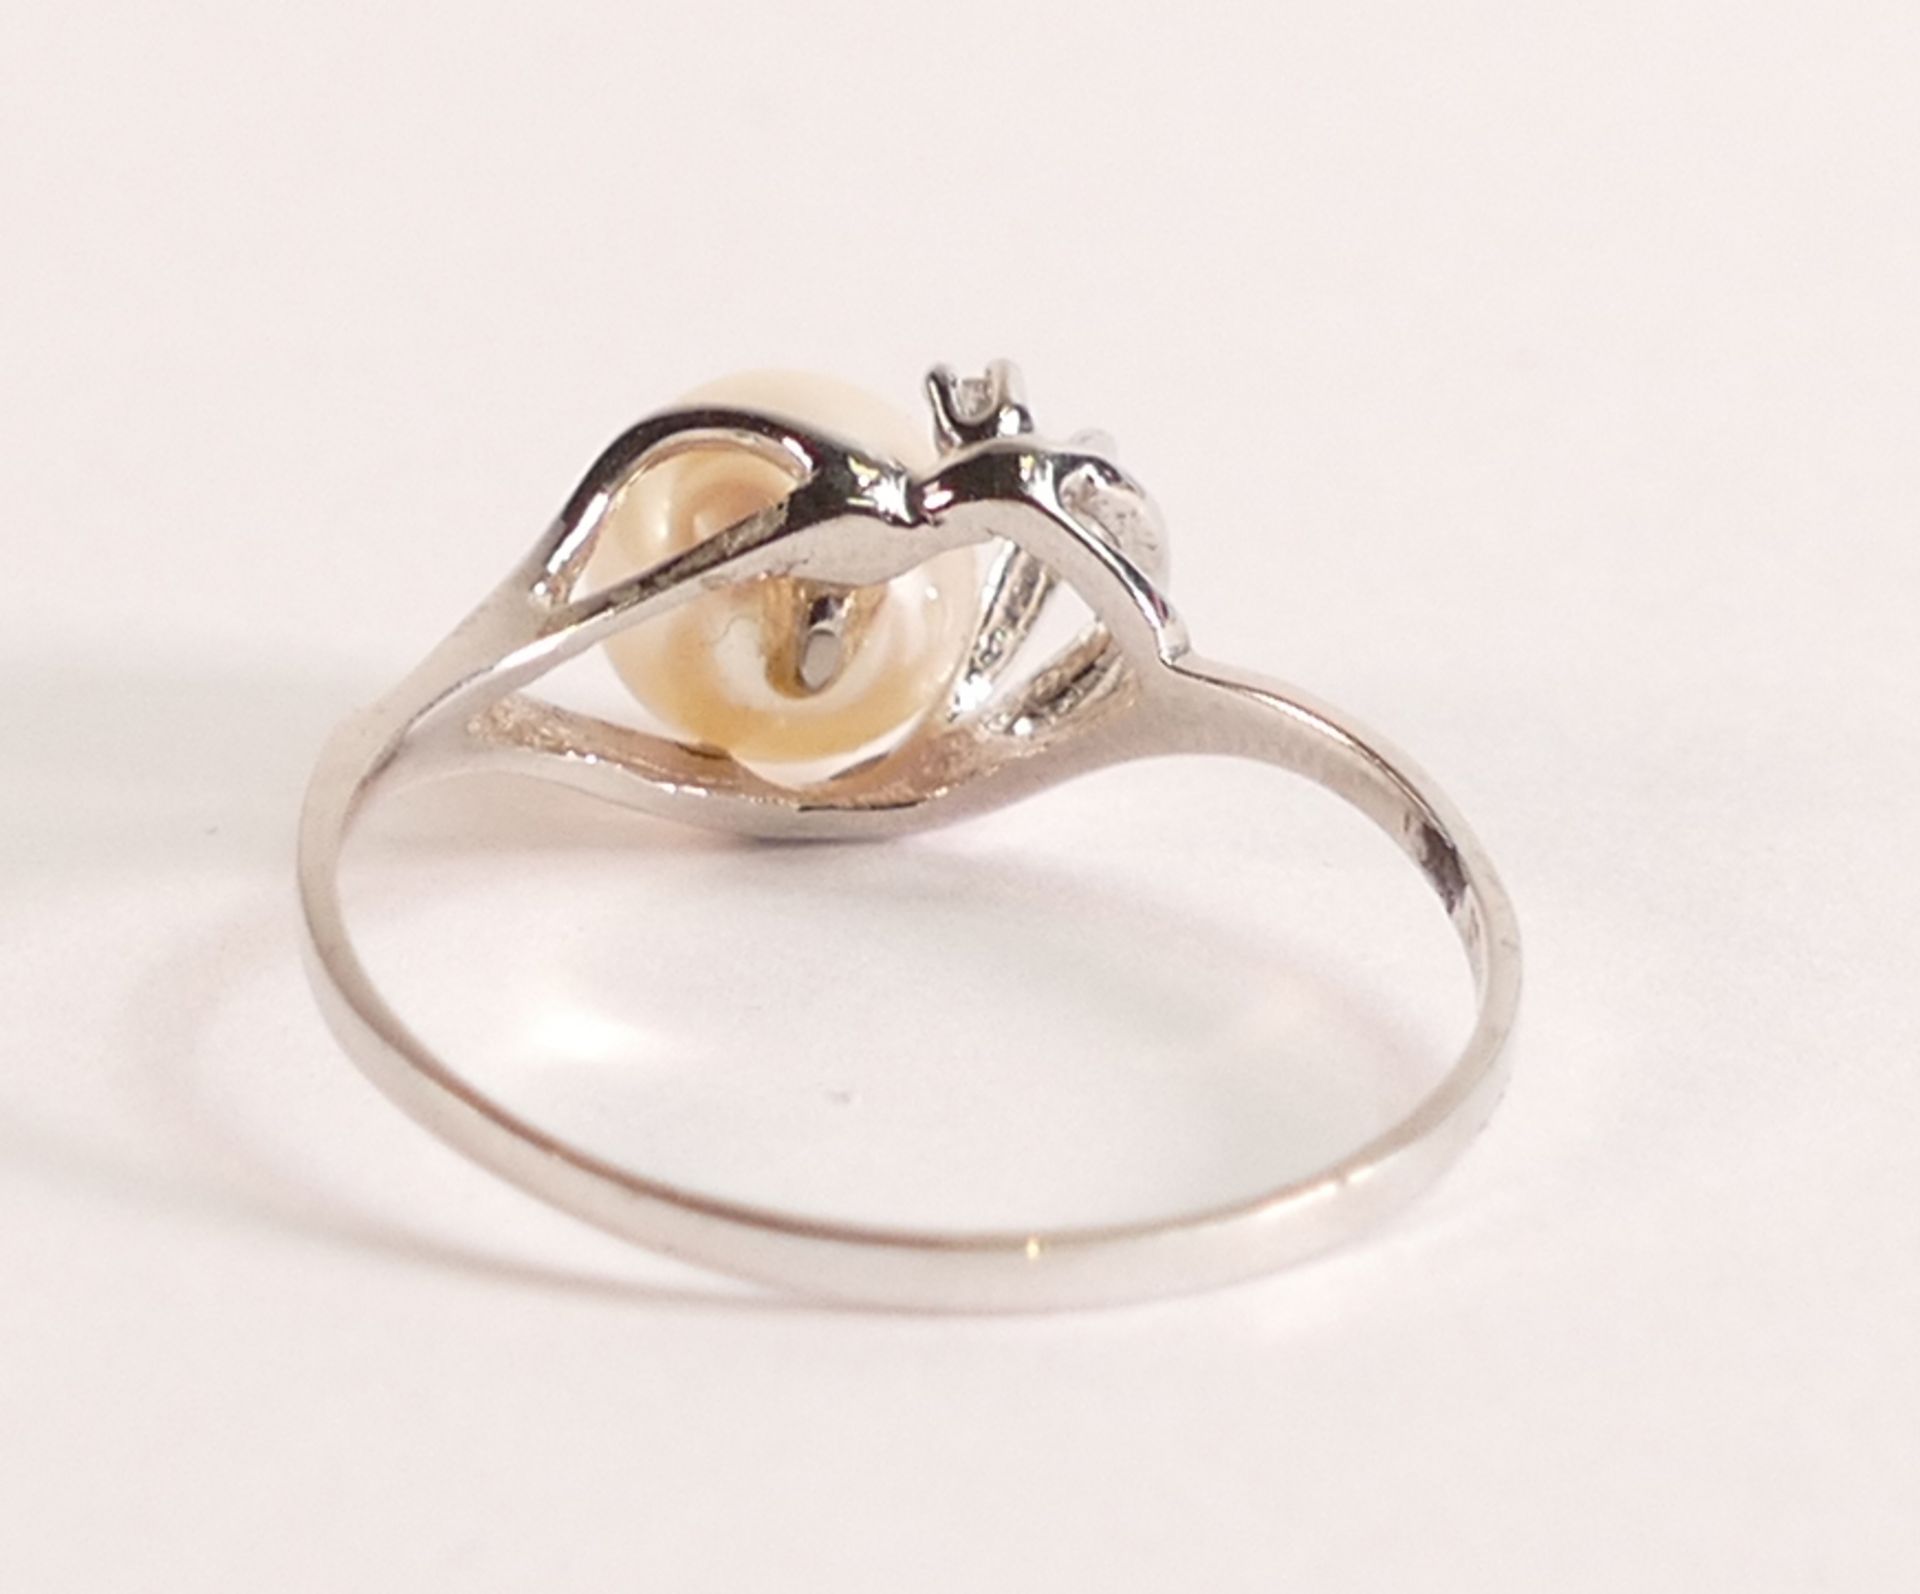 Pearl & Diamond Ring in 9ct White Gold - 1.6g. A skilfully sculpted band supports a freshwater pearl - Image 3 of 3